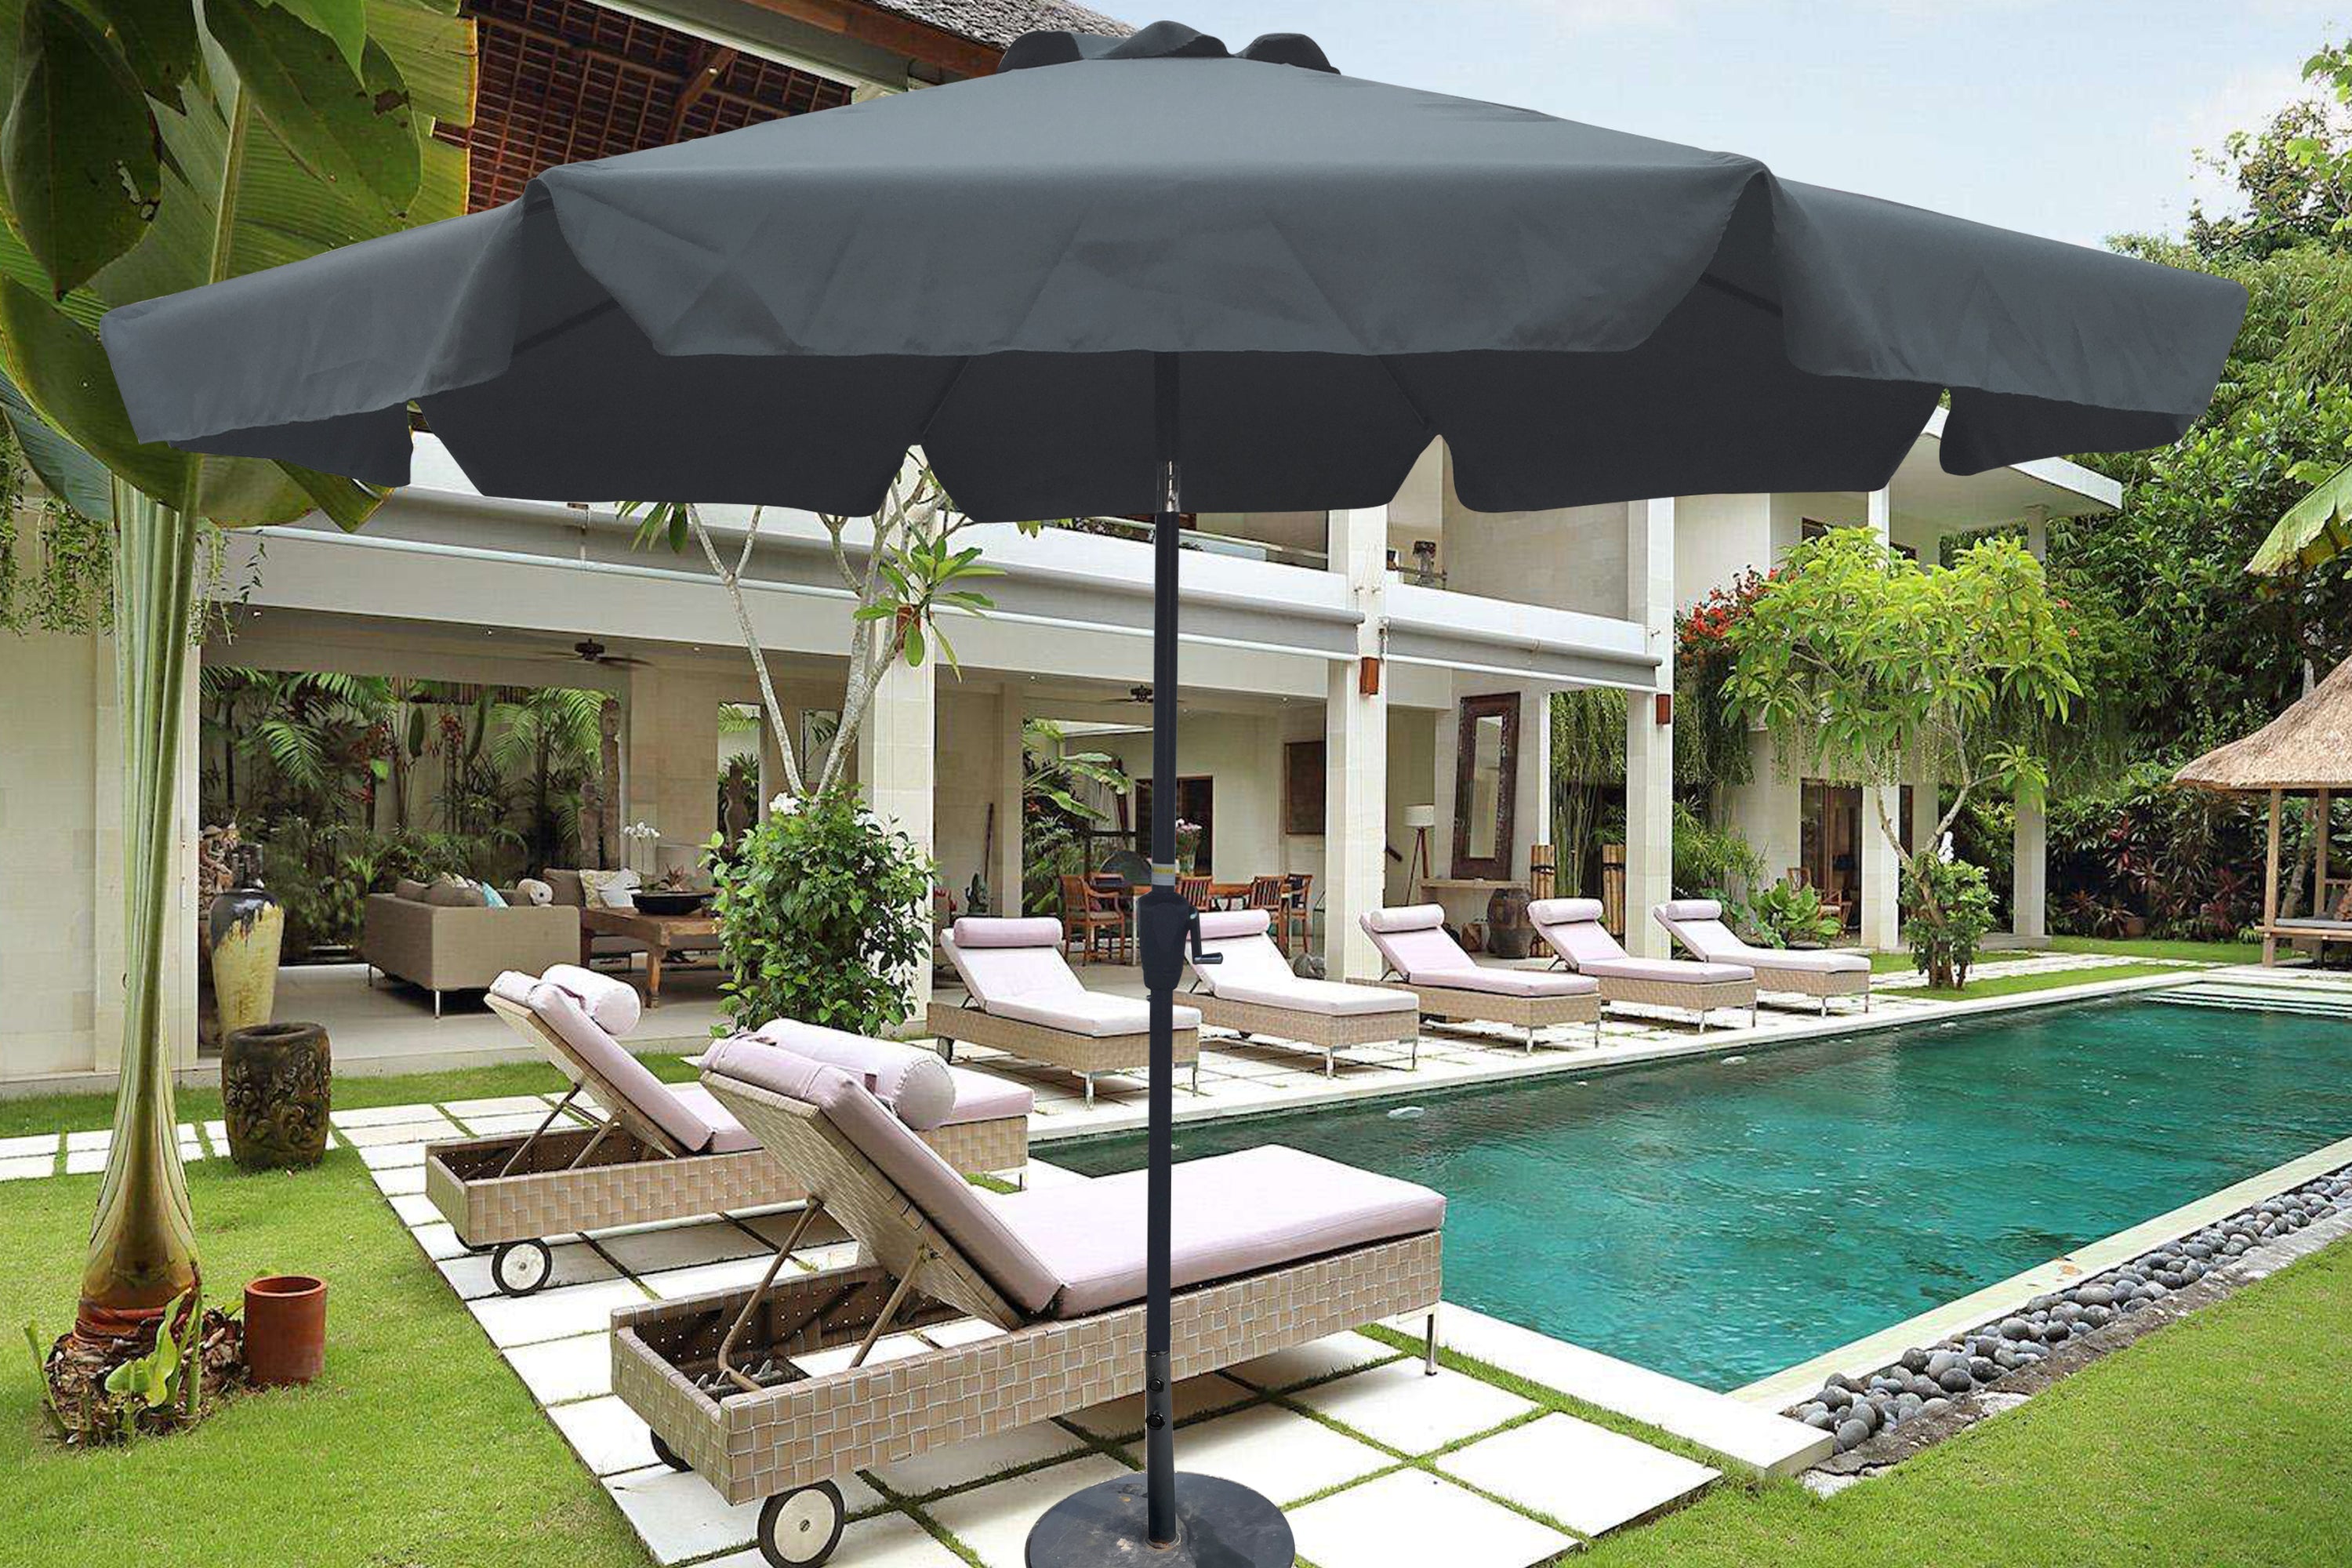 10-FT-Outdoor--Umbrella--WITH-FLAP-with-tilt-,with-crank,-base,-grey-Umbrellas-&-Sunshades